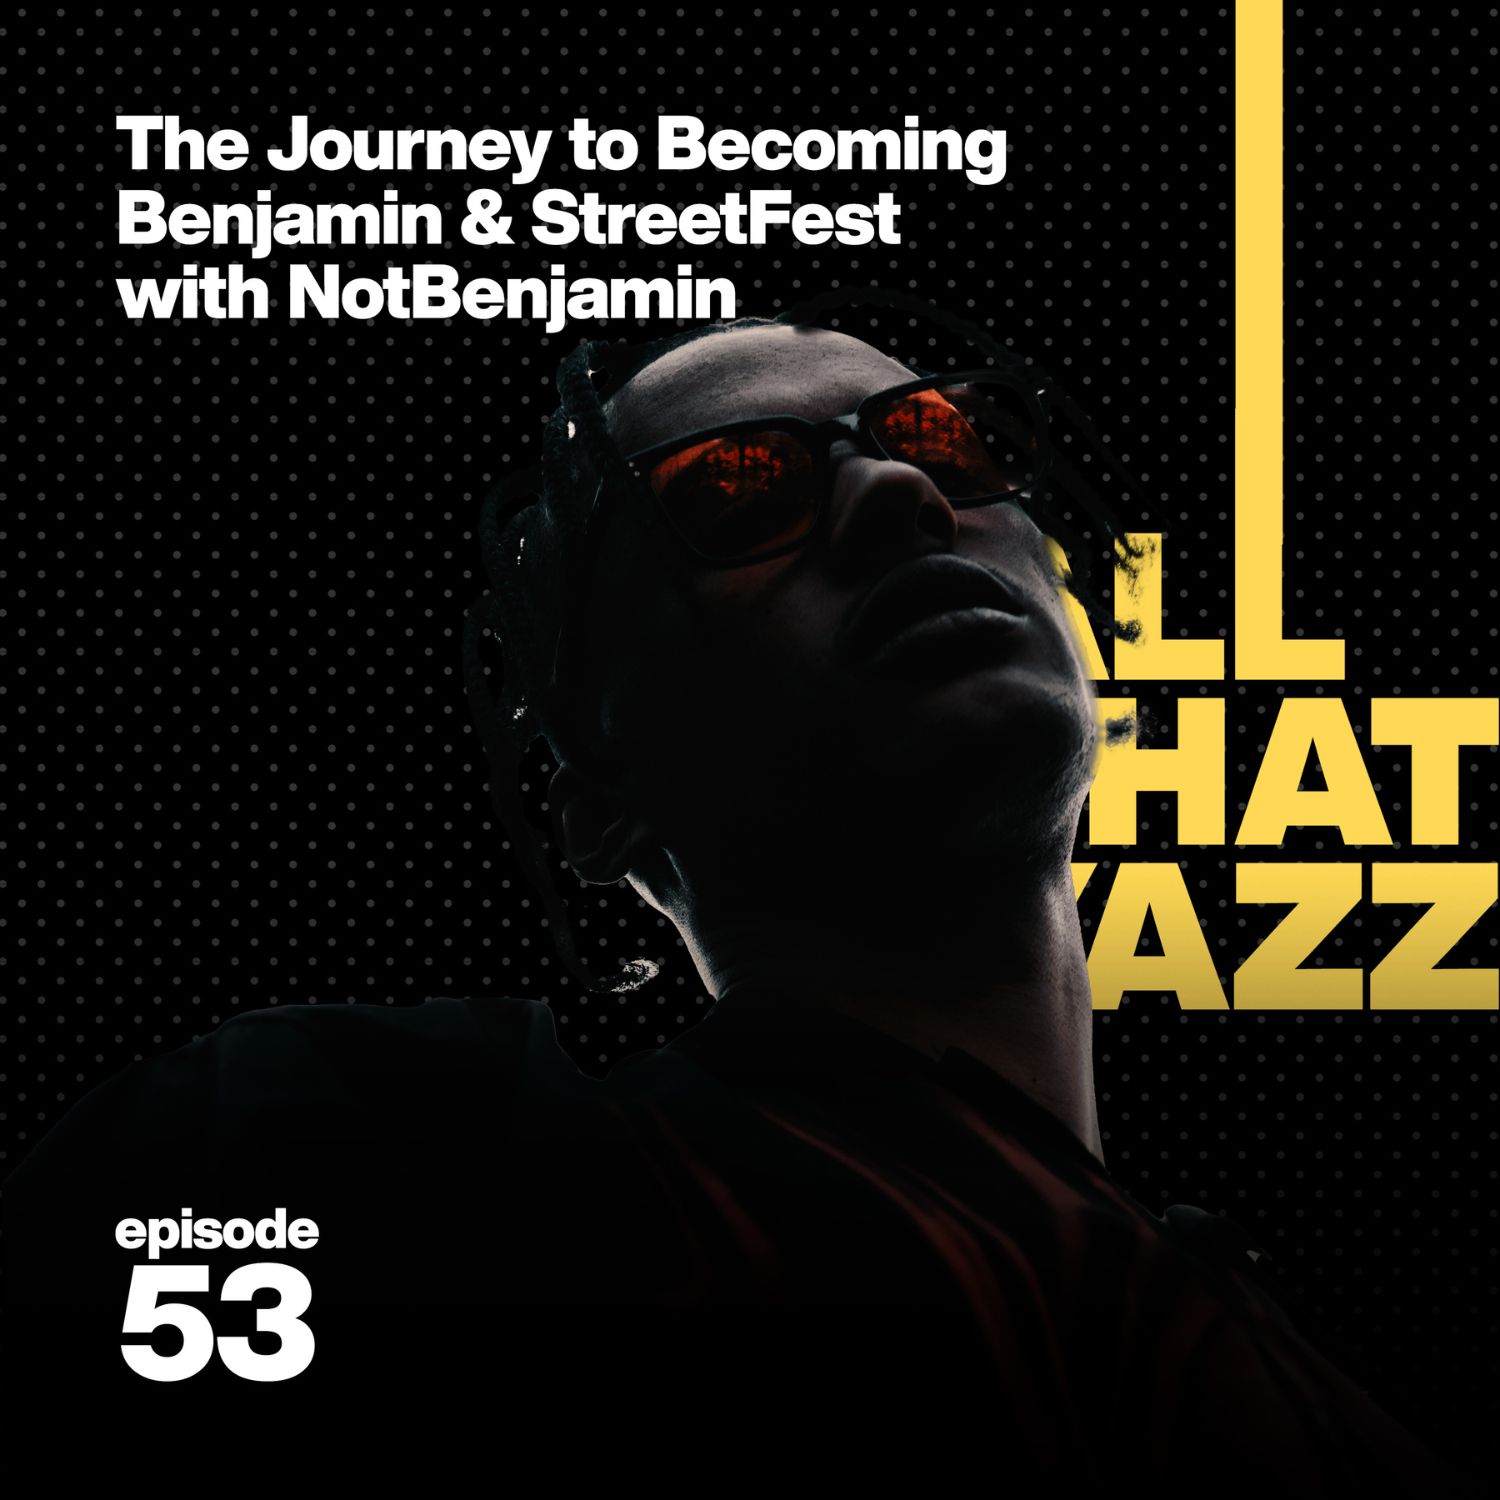 53. The Journey to Becoming Benjamin & StreetFest with NotBenjamin